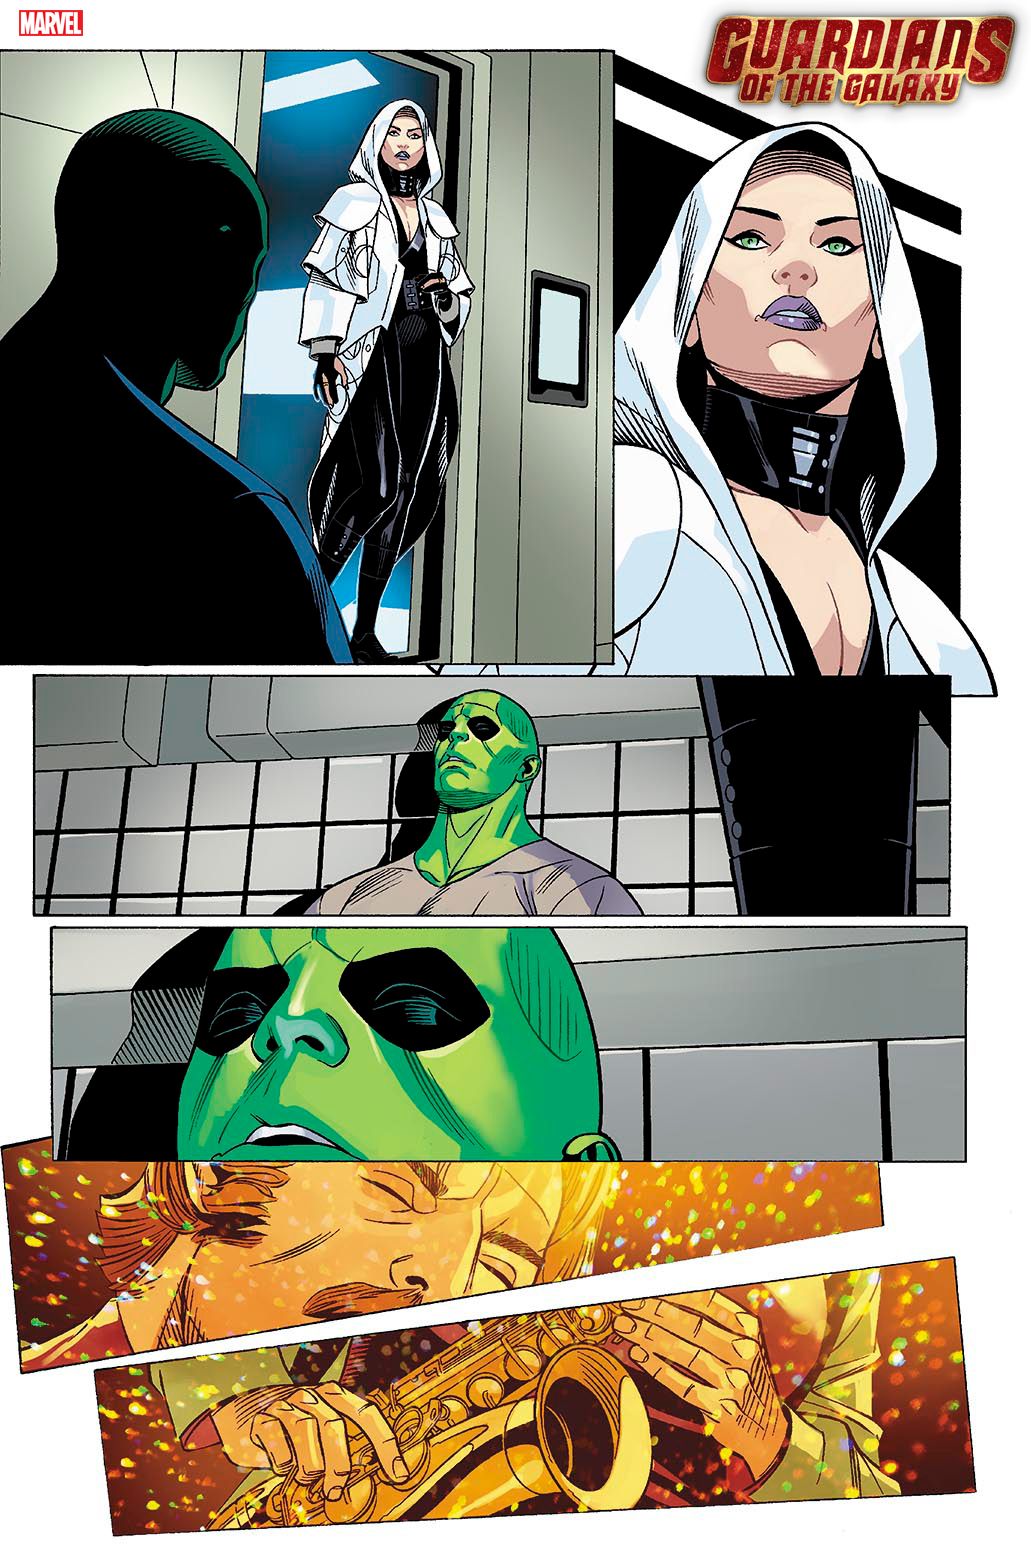 EXCLUSIVE: Art from Guardians of the Galaxy #3, by Chris Sprouse, Karl Story and Frederic Blee